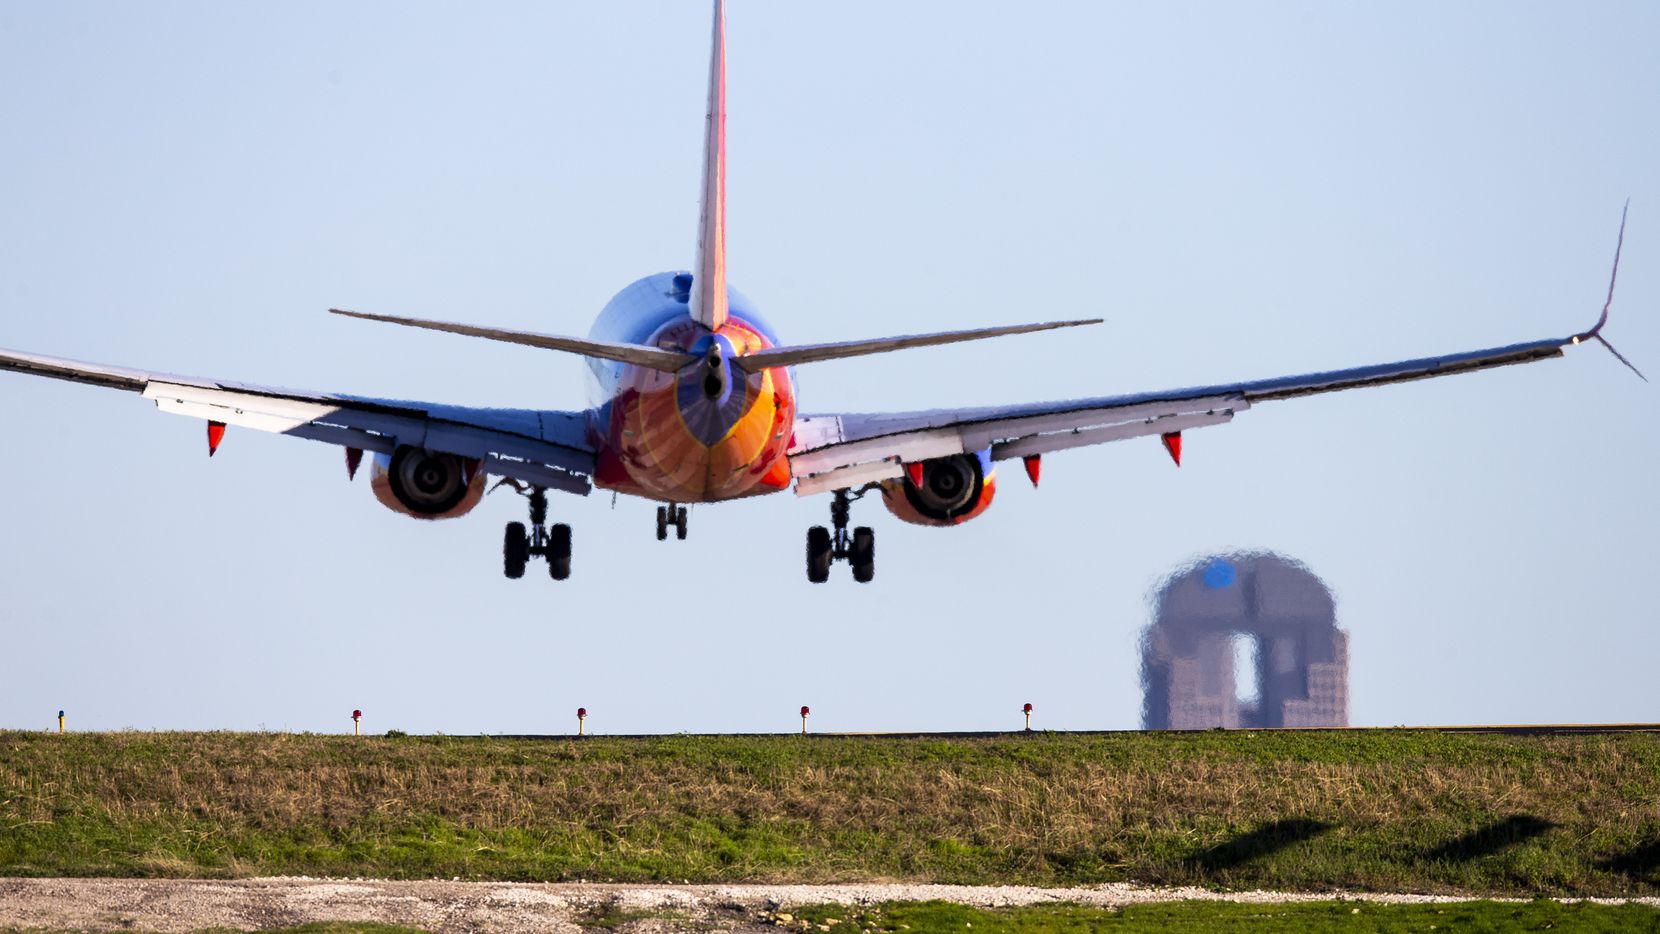 A Southwest Arlines Boeing 737 jet plane lands at Love Field in Dallas on March 13, 2019.